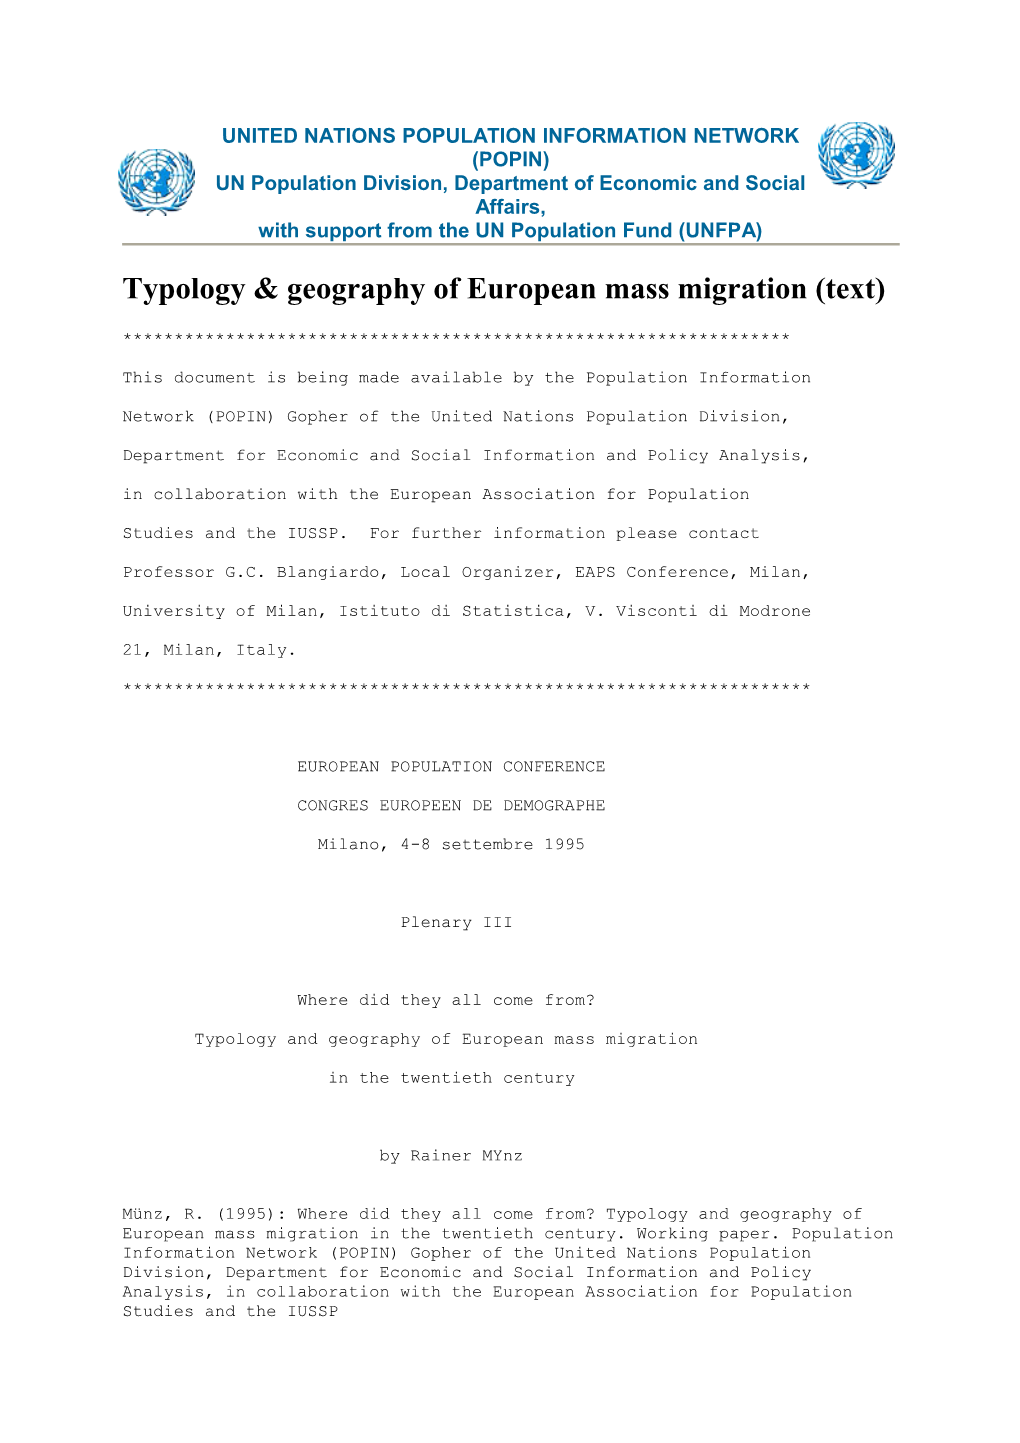 Typology & Geography of European Mass Migration (Text)